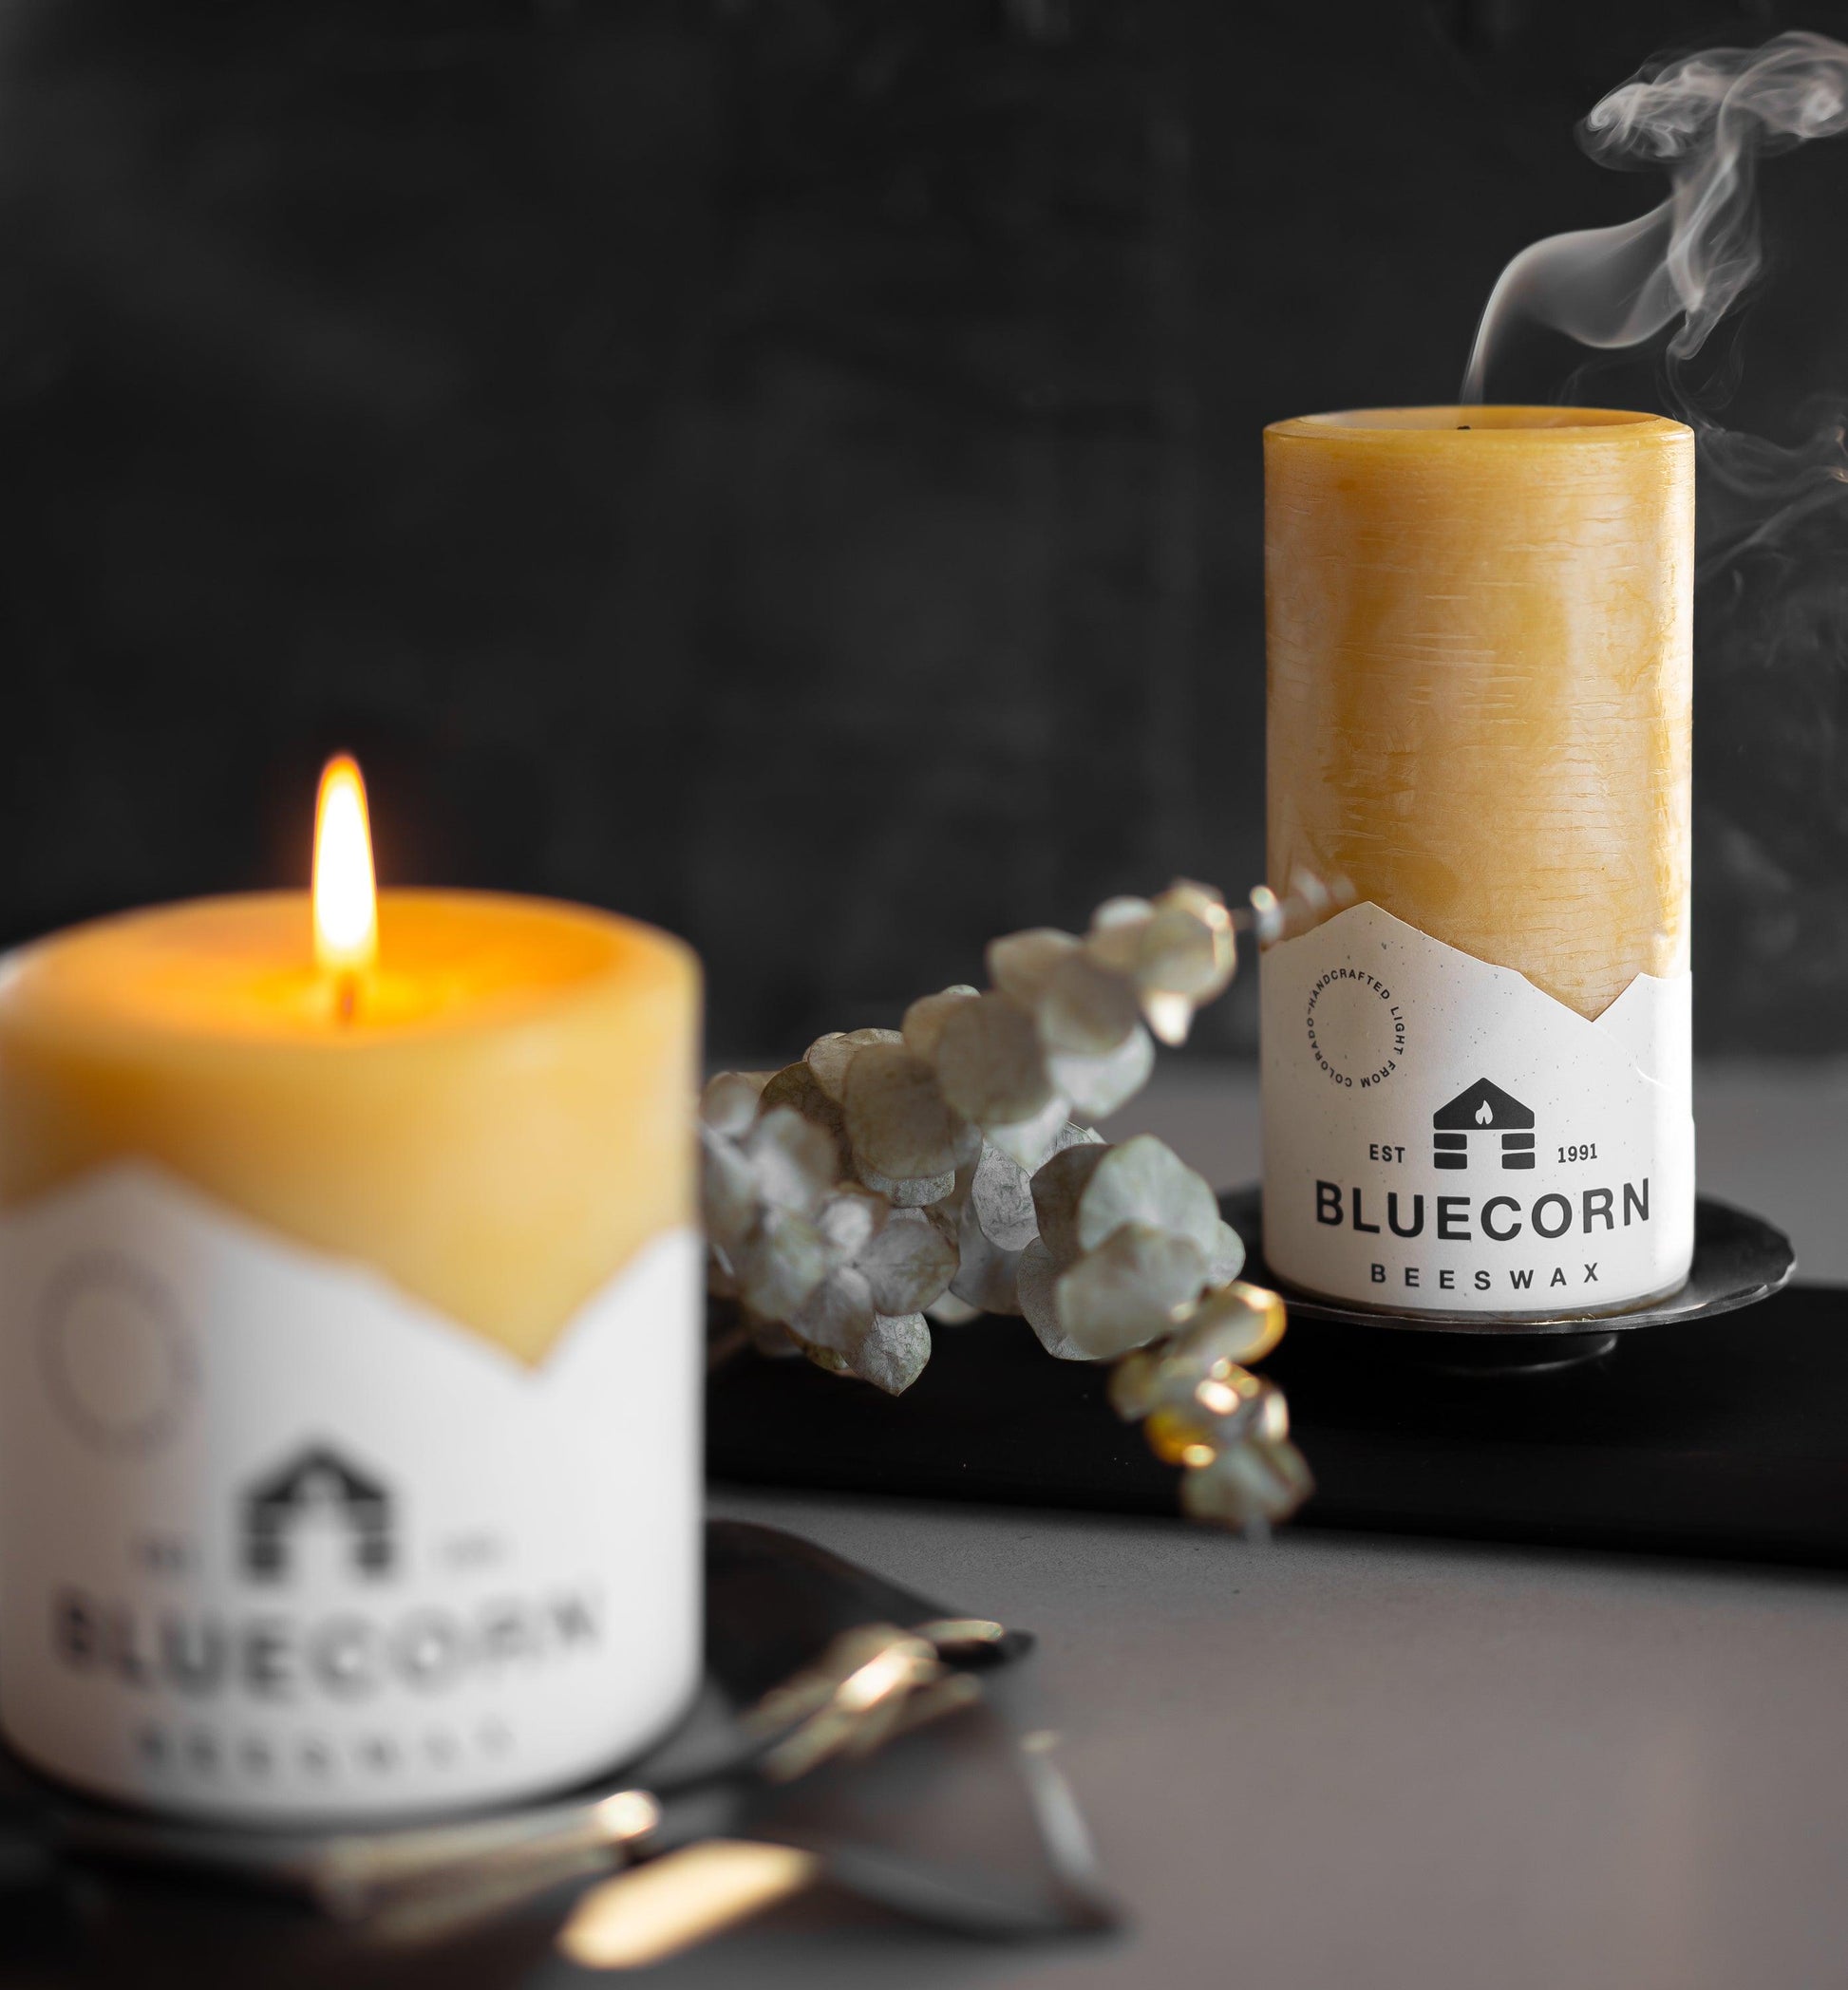 Features two beeswax pillars atop forged pillar bases. One candle is lit, while the other has just been blown out as a plume of smoke billows over the candle. Both candles are in front of a black backdrop with a sprig of Eucalyptus between them.  